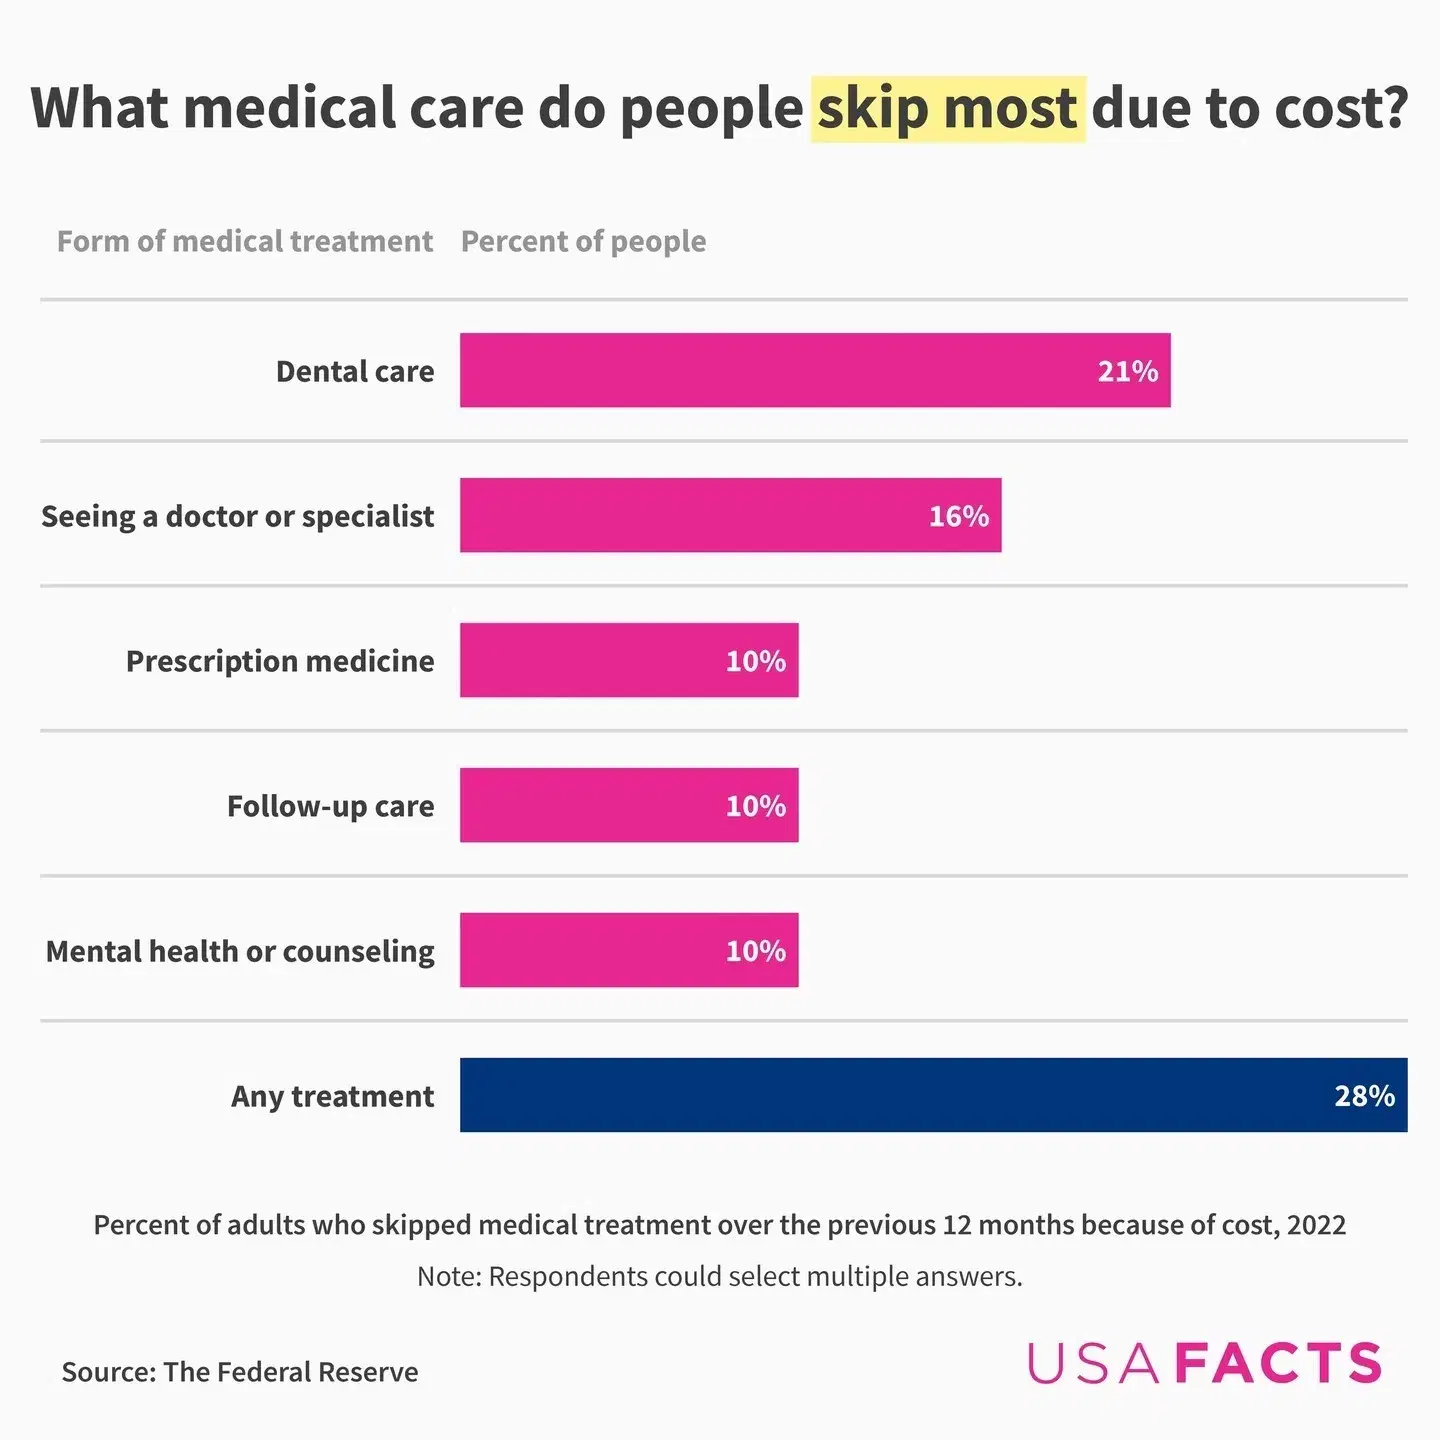 What Medical Care do Americans Skip Most Due to Cost?